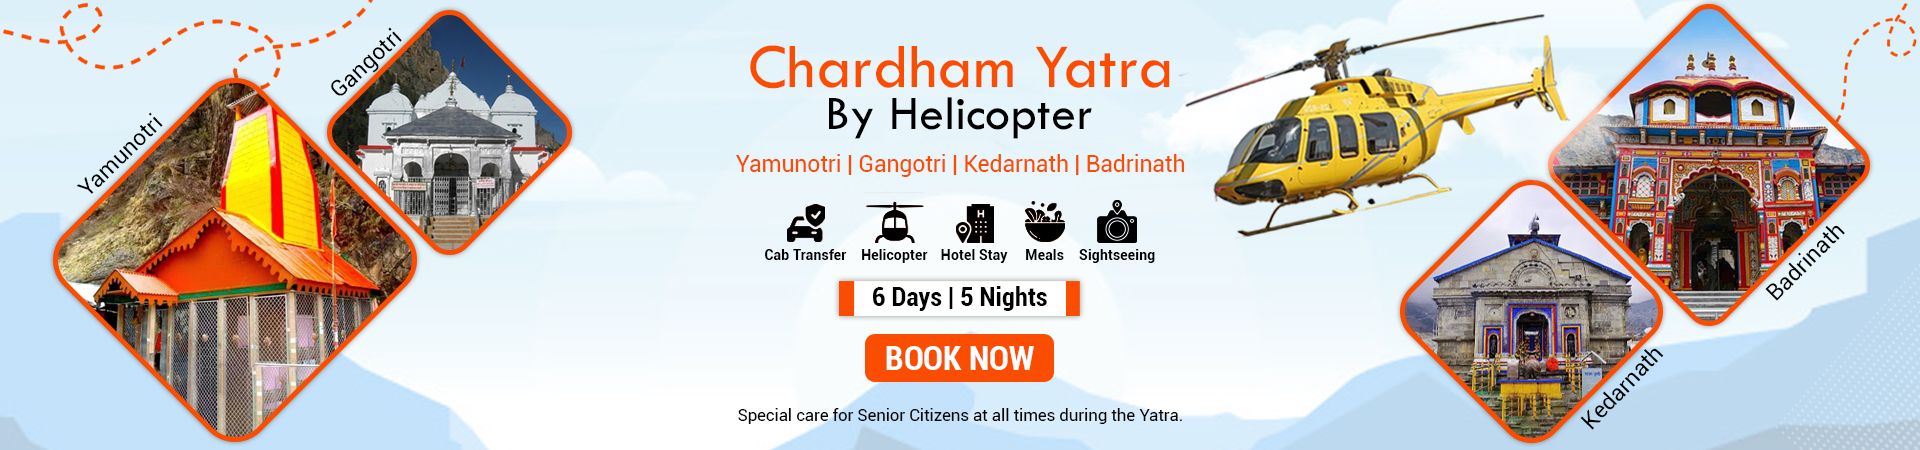 Chardham yatra by helicopter - 6 Day